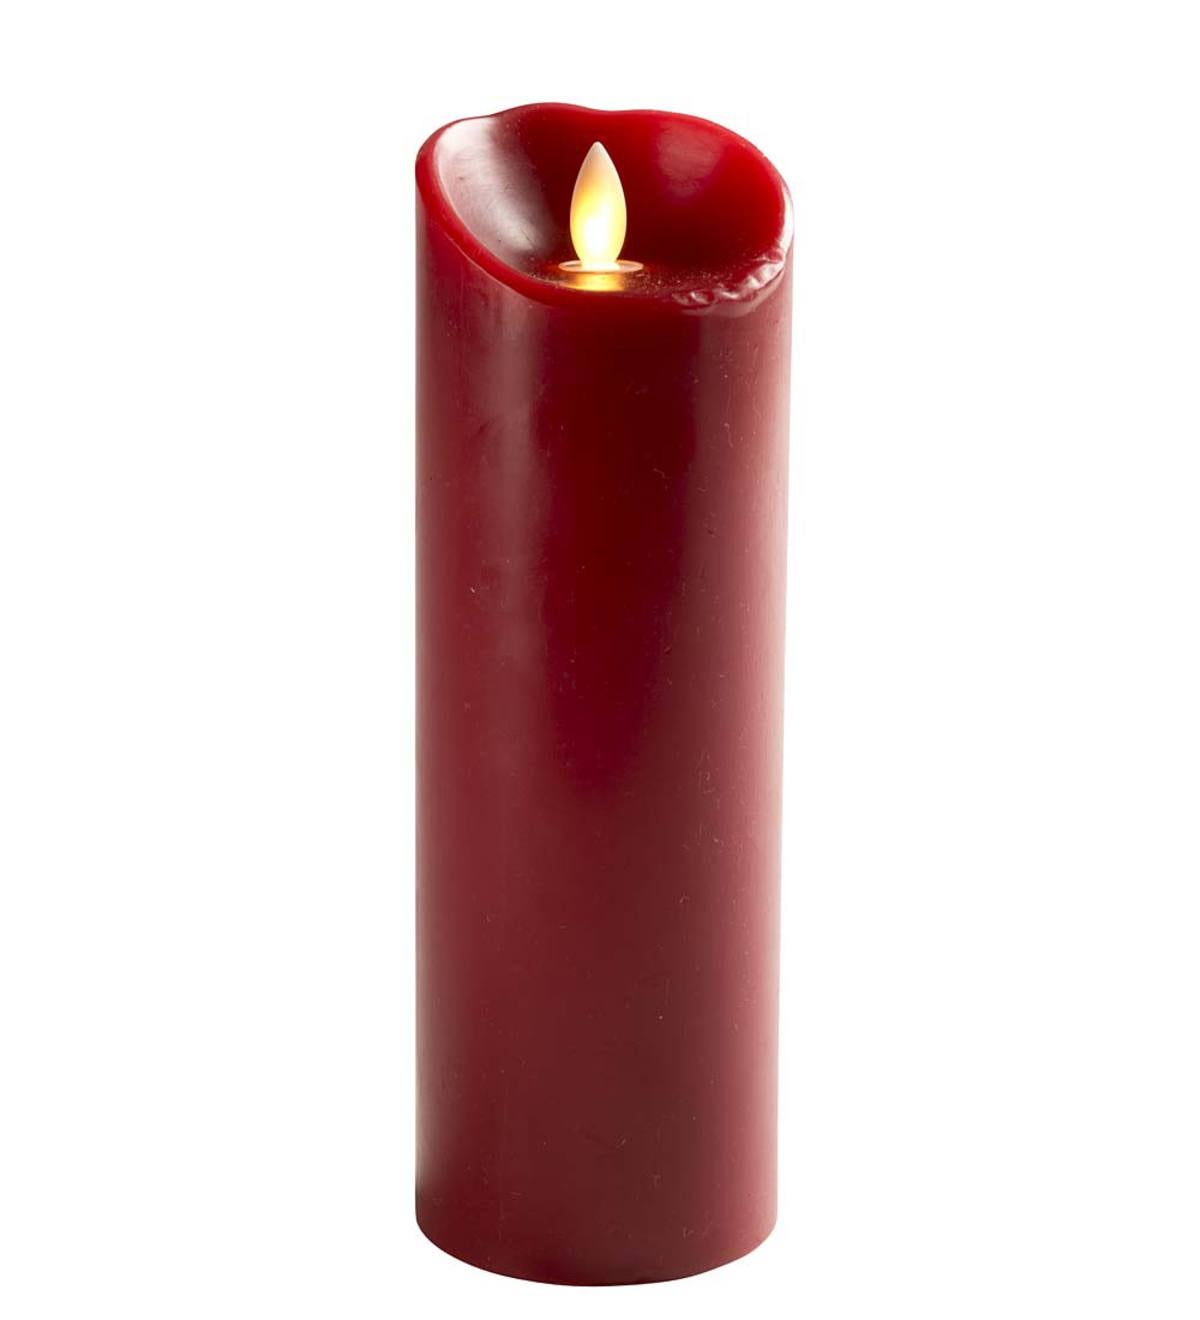 LED Pillar Candle with Auto-Timer, 9"H